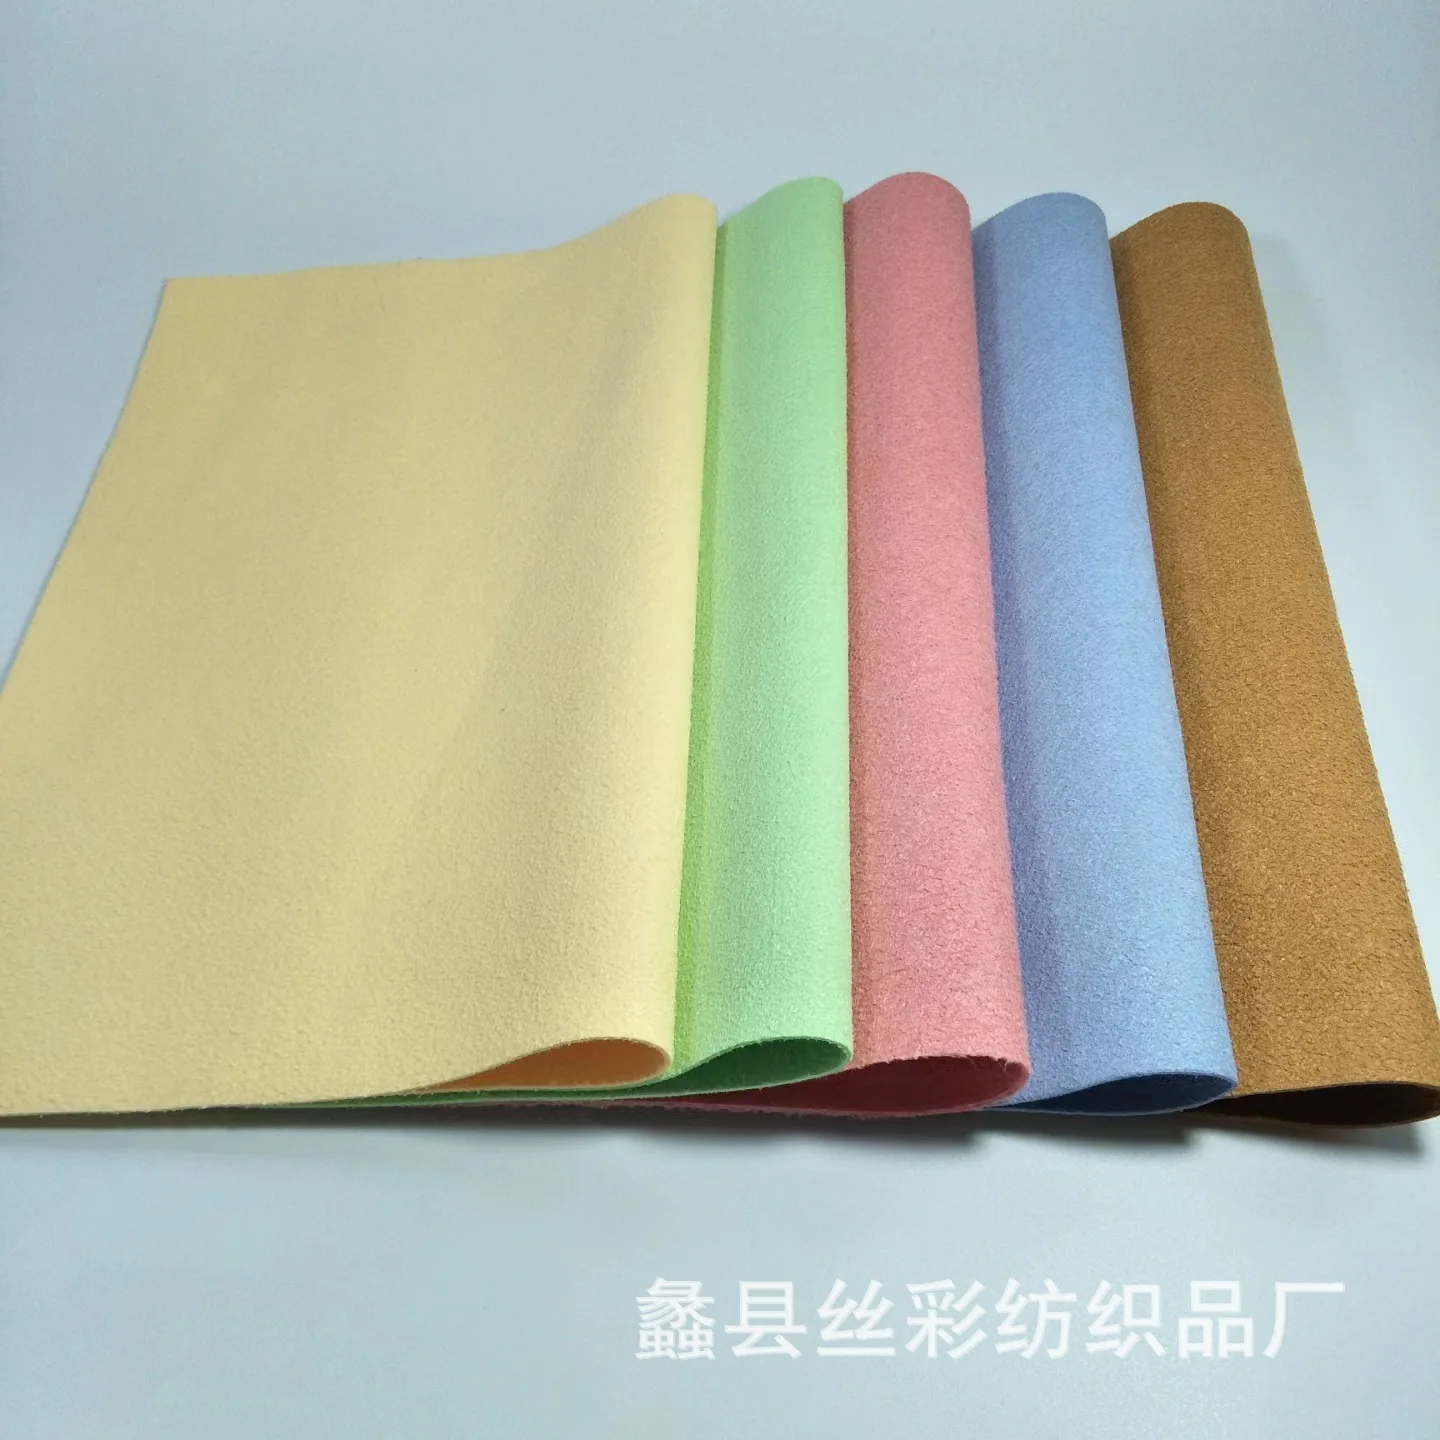 In 2023, the new tatami upholstered wall of simple thickened fiber